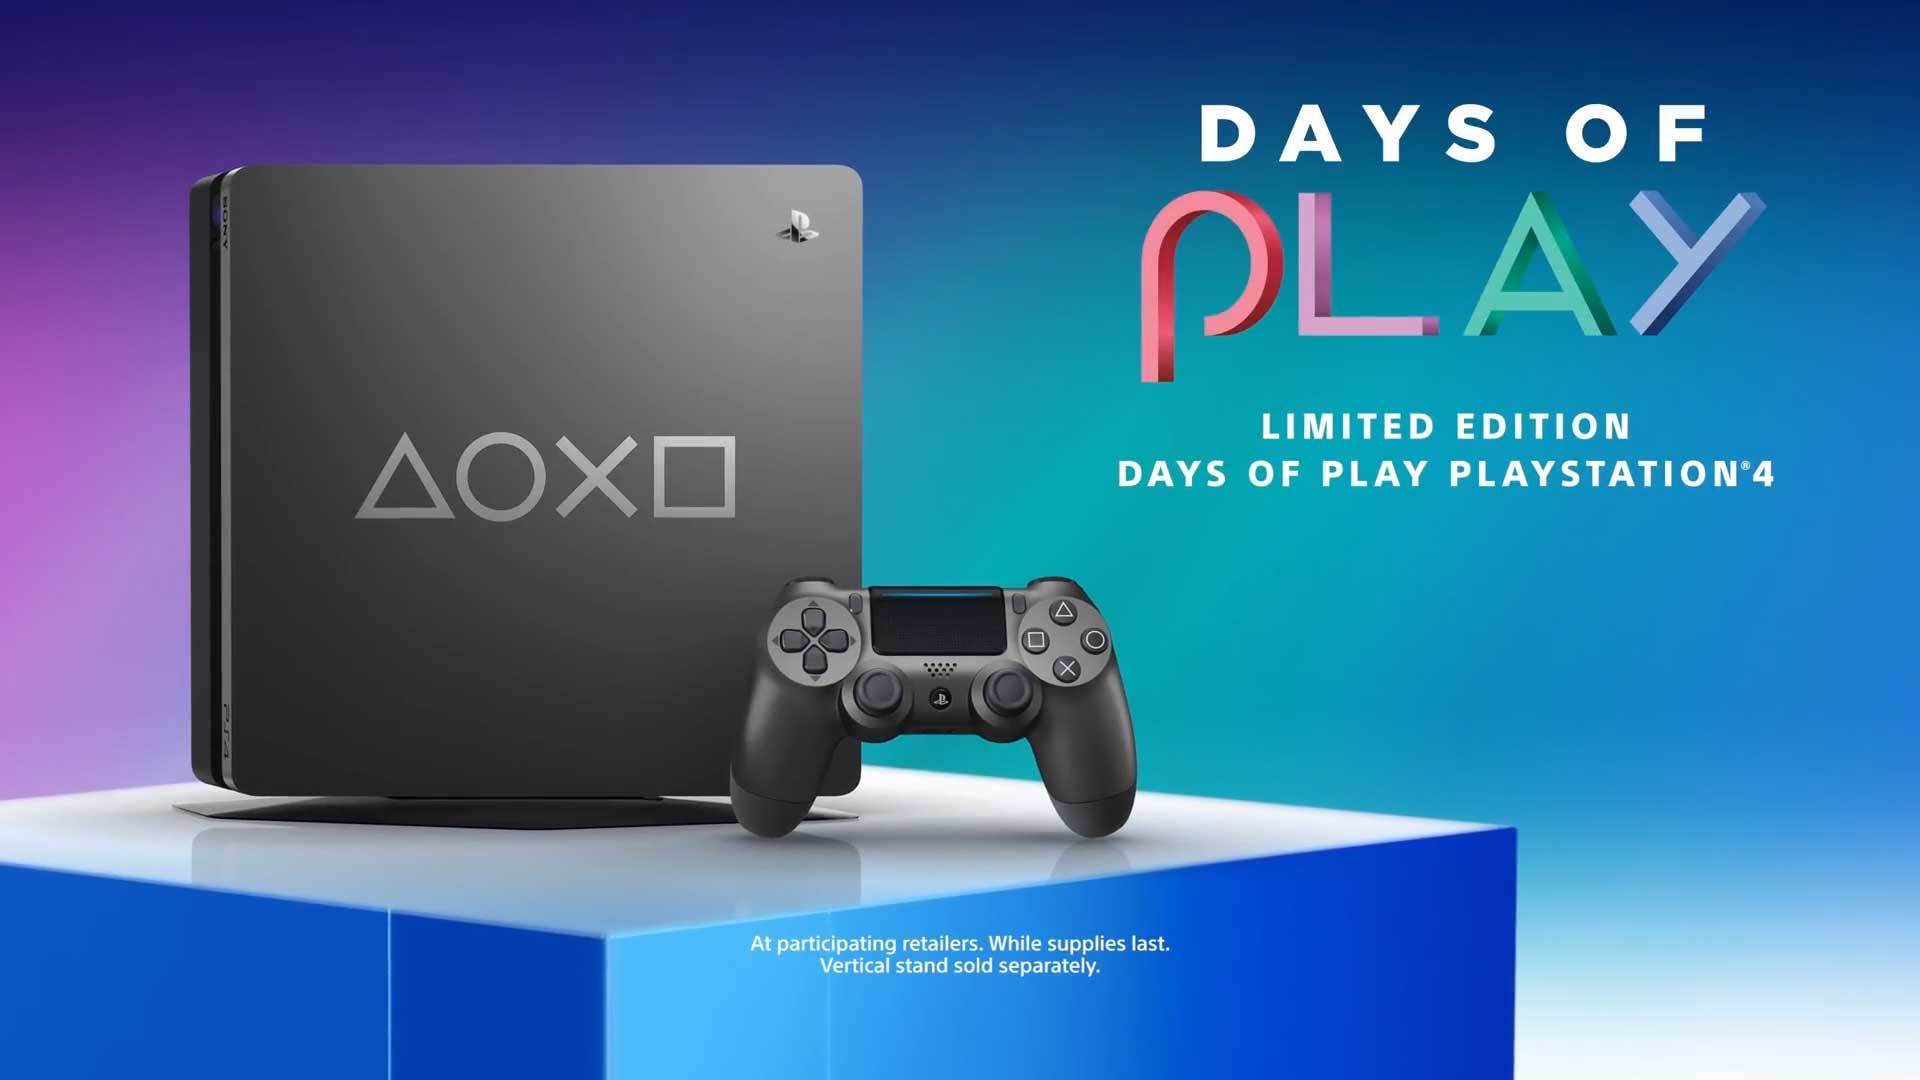 Days of Play Returns This E3 With a Special Limited Edition PS4